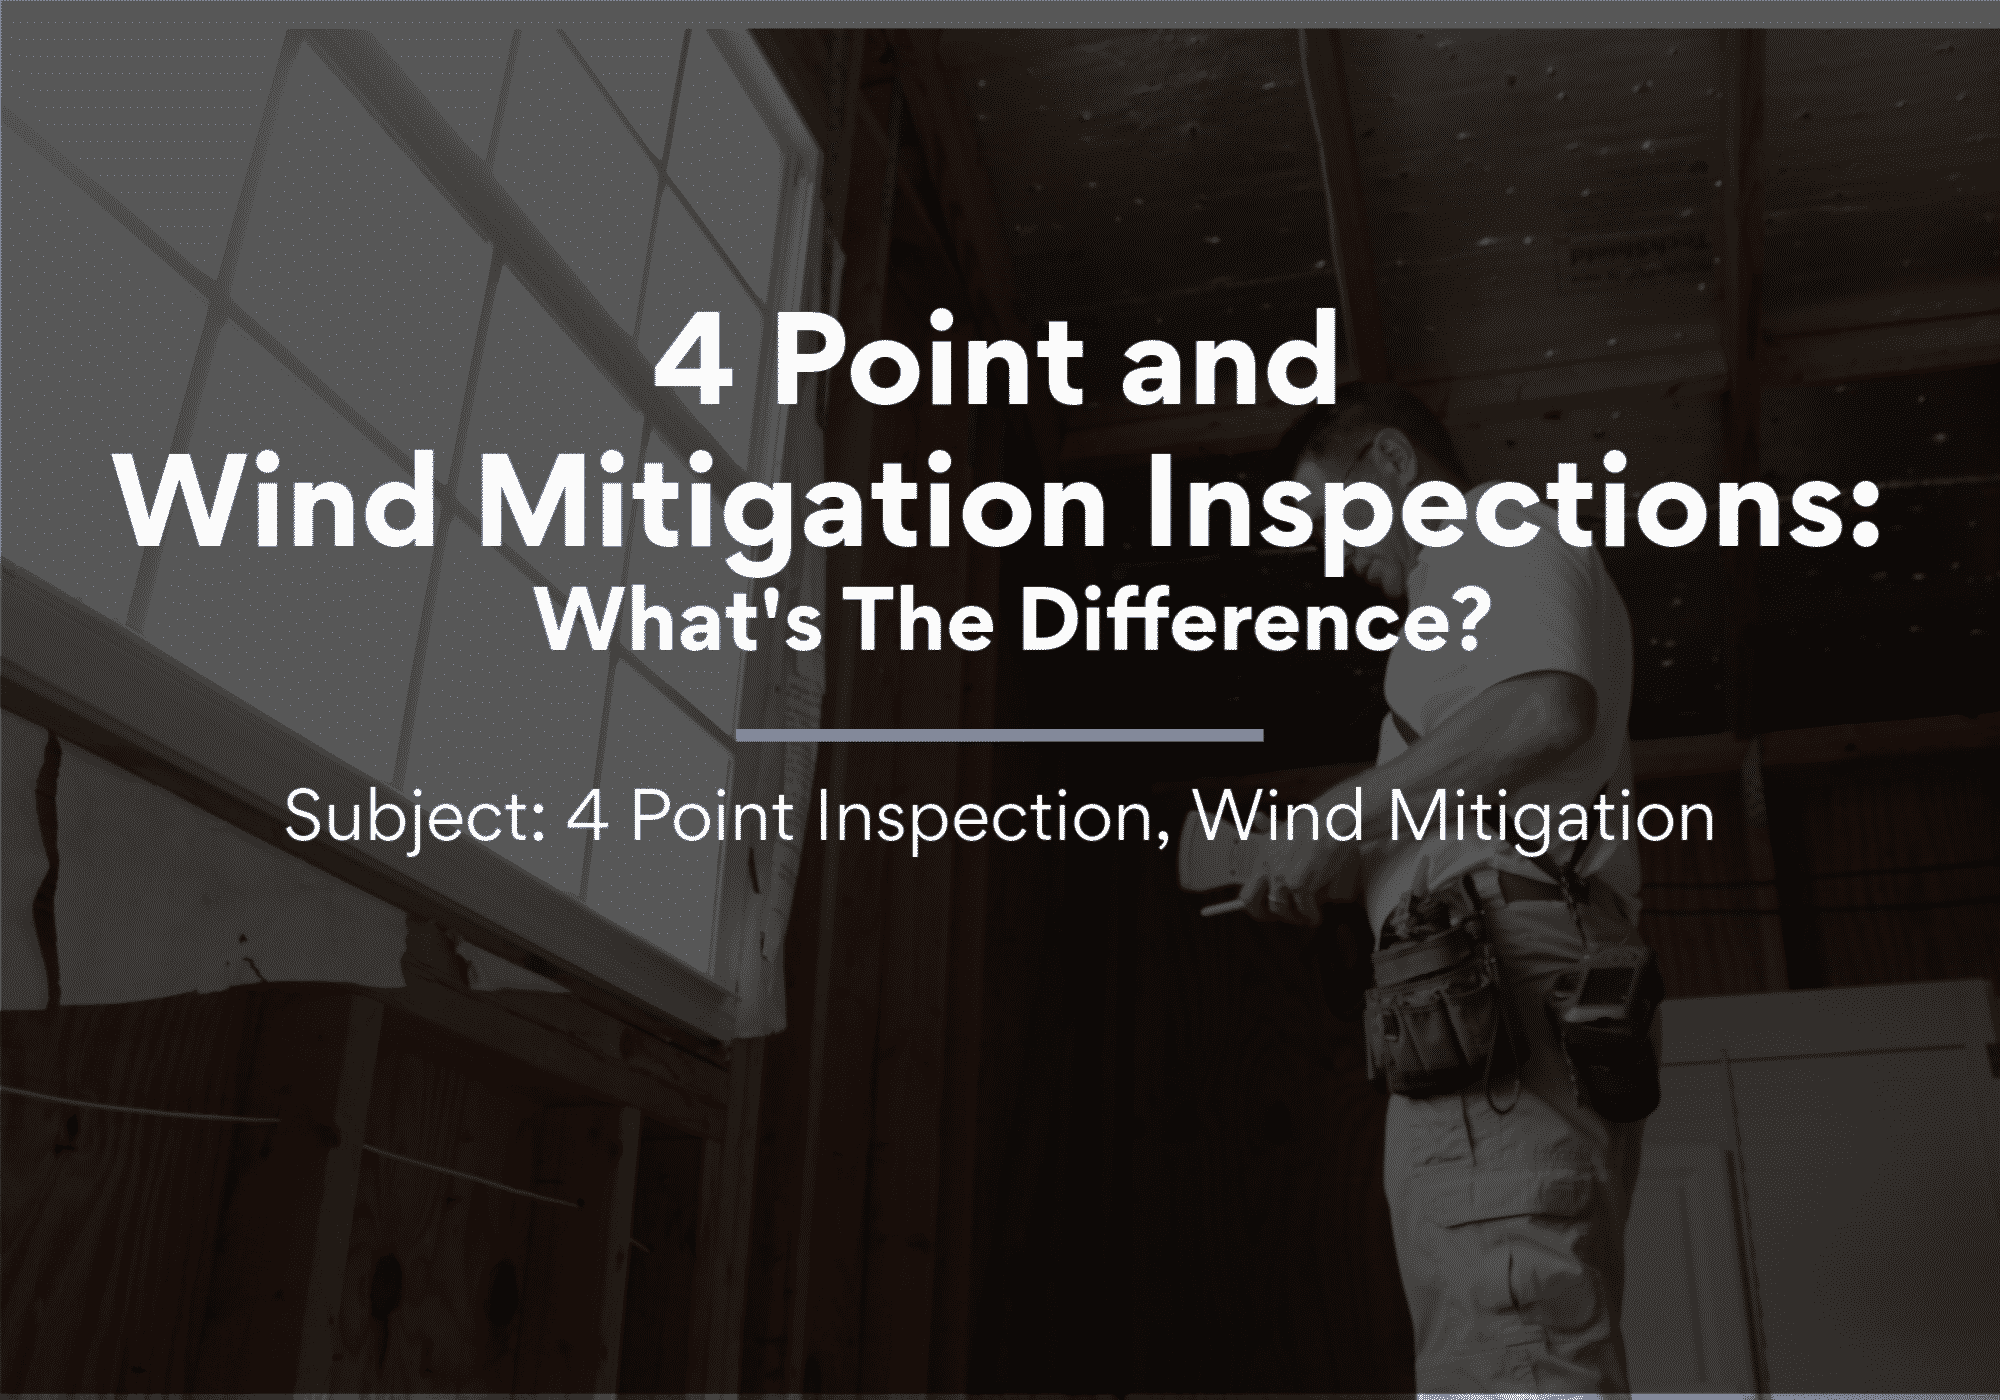 4 Point and Wind Mitigation Inspections: What's The Difference